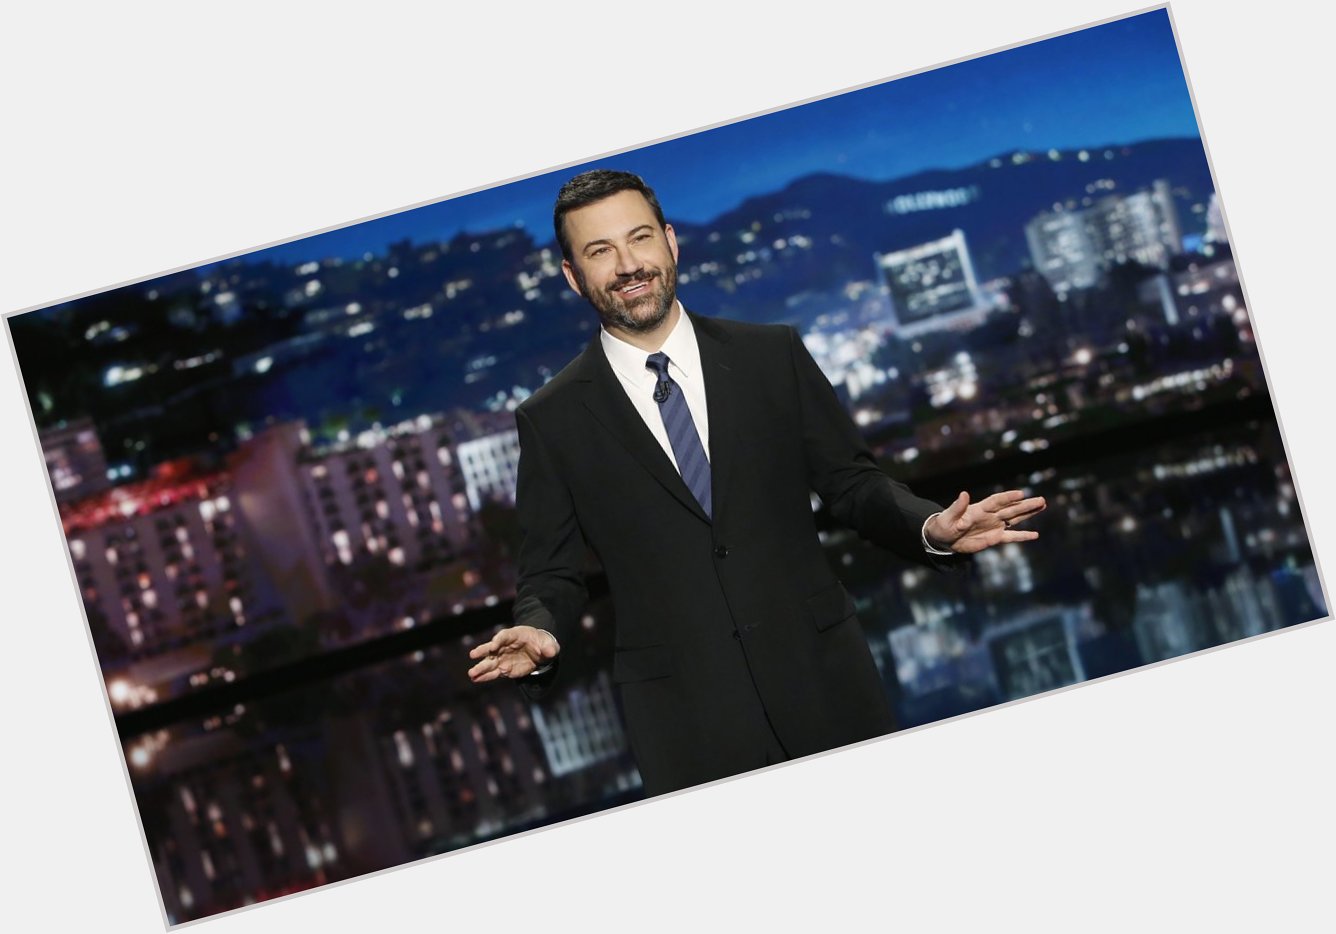 HuffPostEnt: Happy birthday, jimmykimmel! Watch 37 of his funniest moments  